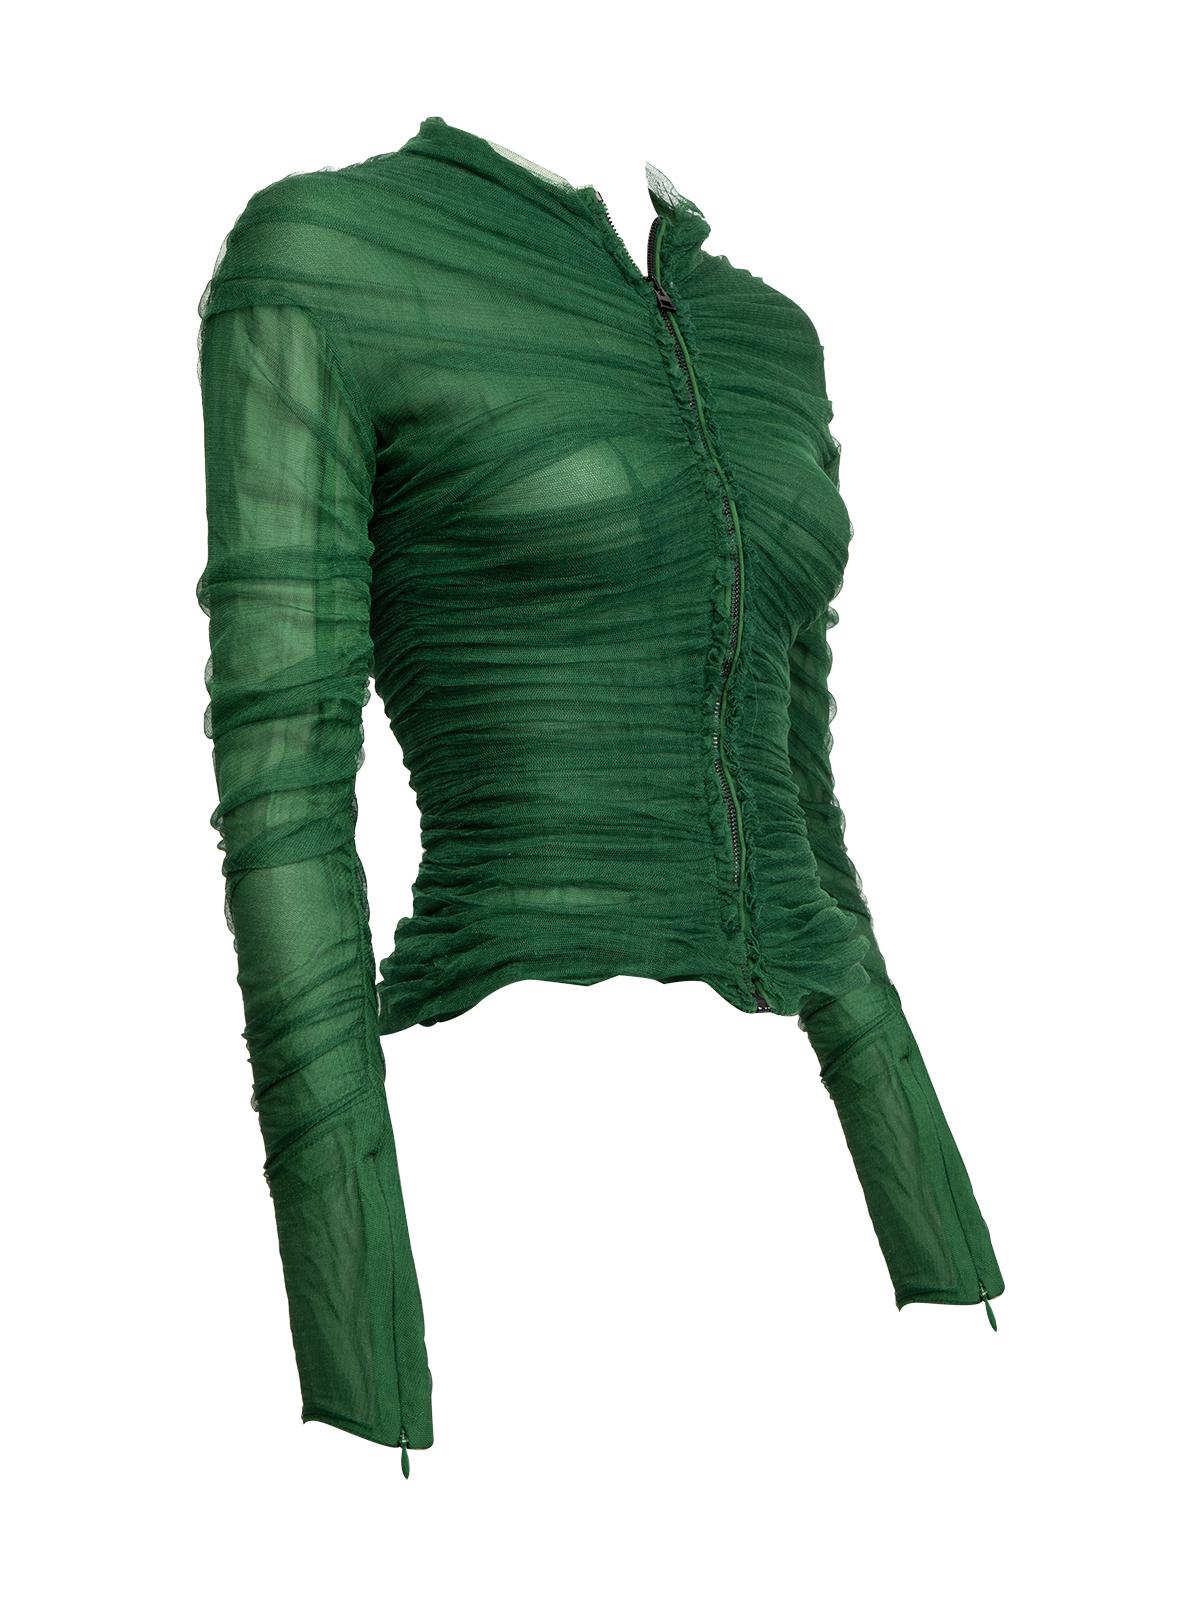 CONDITION is Very good. Minor wear to top is evident. Light signs of pull to mesh material on this used Tom Ford designer resale item. Details Green Silk Figure-hugging Long sleeves V-Neckline Zip fastening Made in Italy Composition 84% (silk) Care